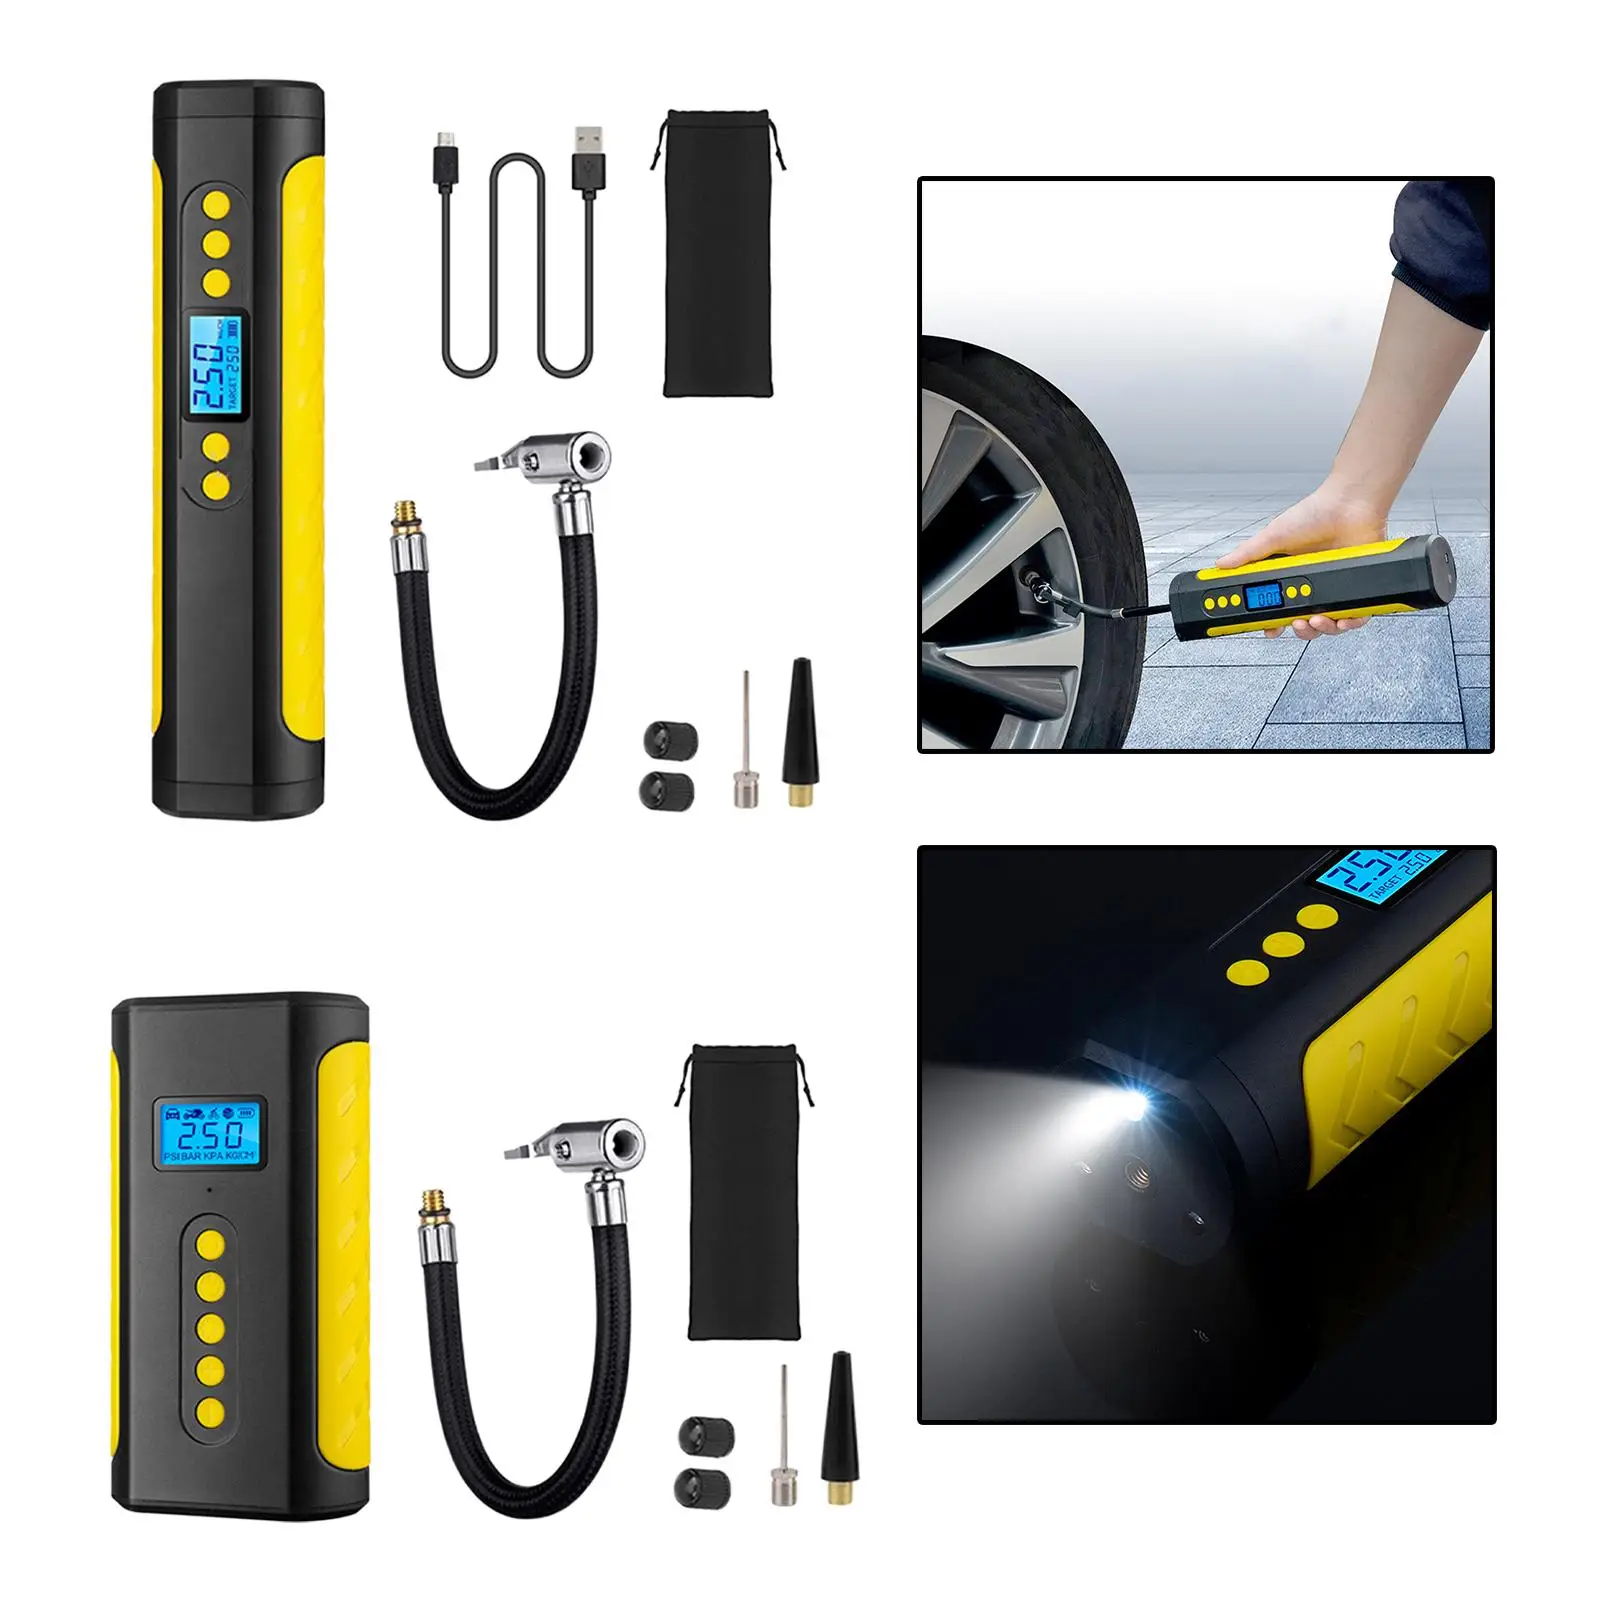 Electric Portable Air Compressor with LED Light Digital Display Compact Tire Inflator for Bicycles Motorcycle Tires Car